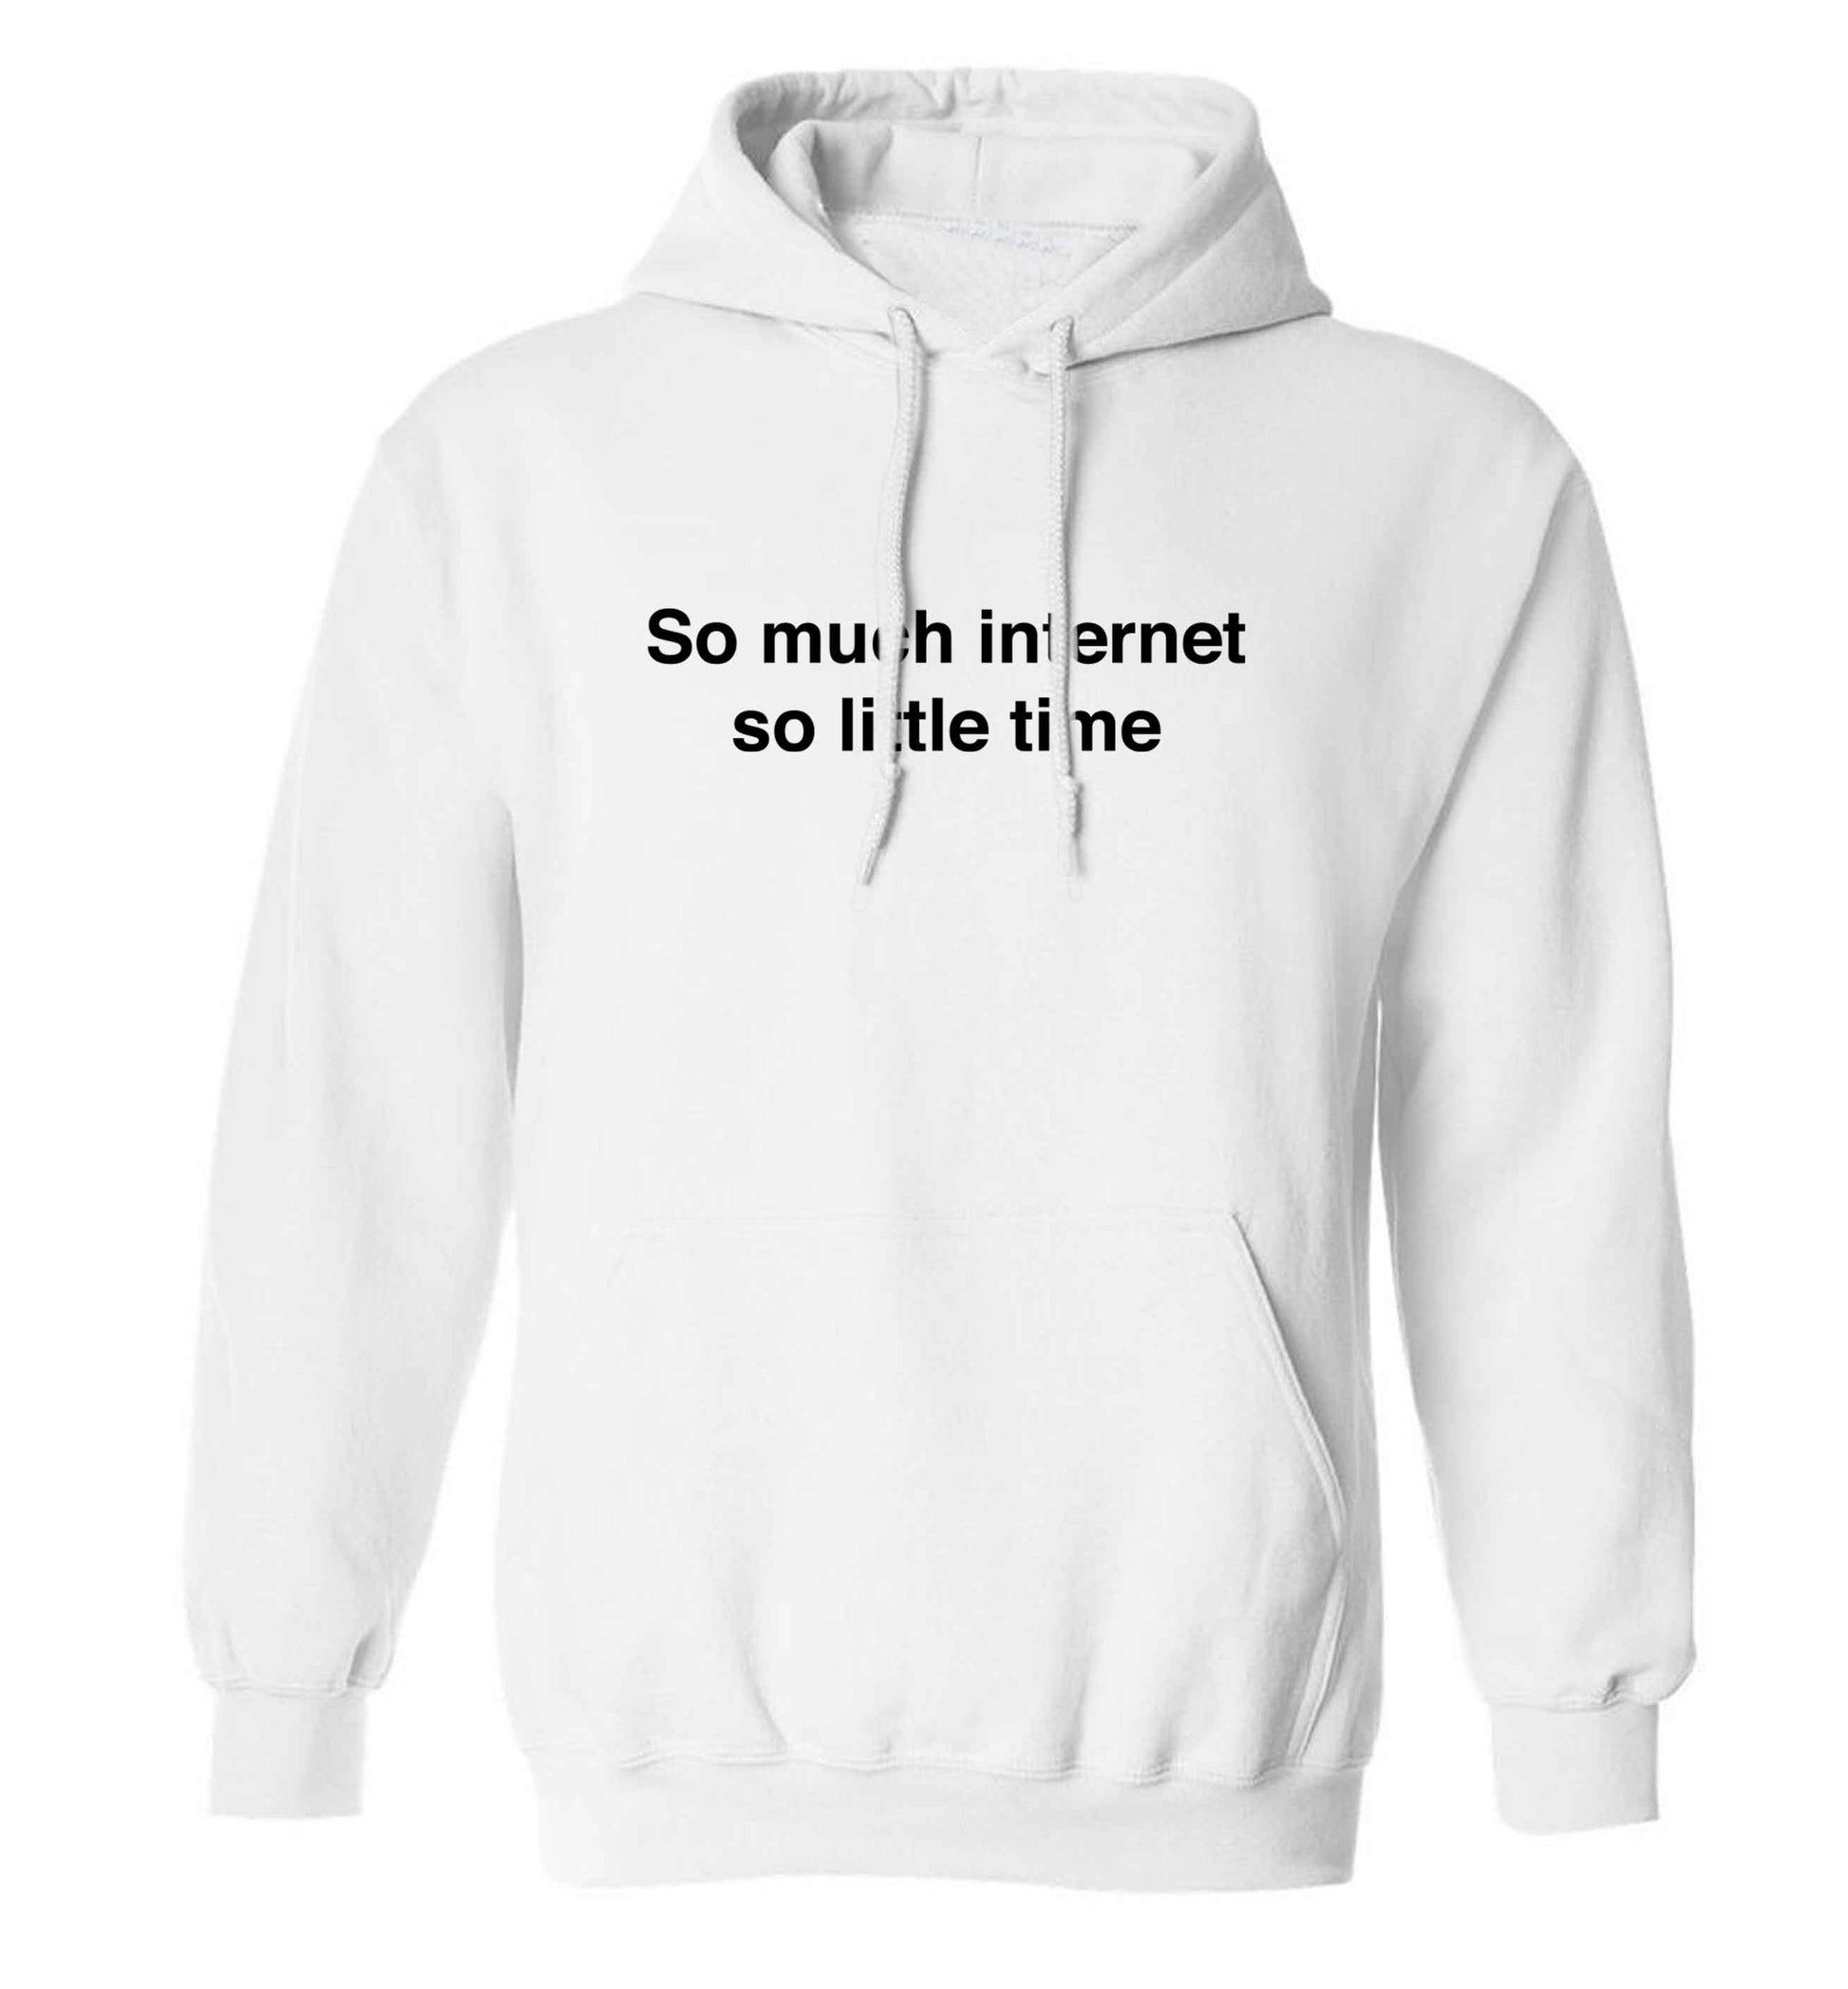 So much internet so little time adults unisex white hoodie 2XL